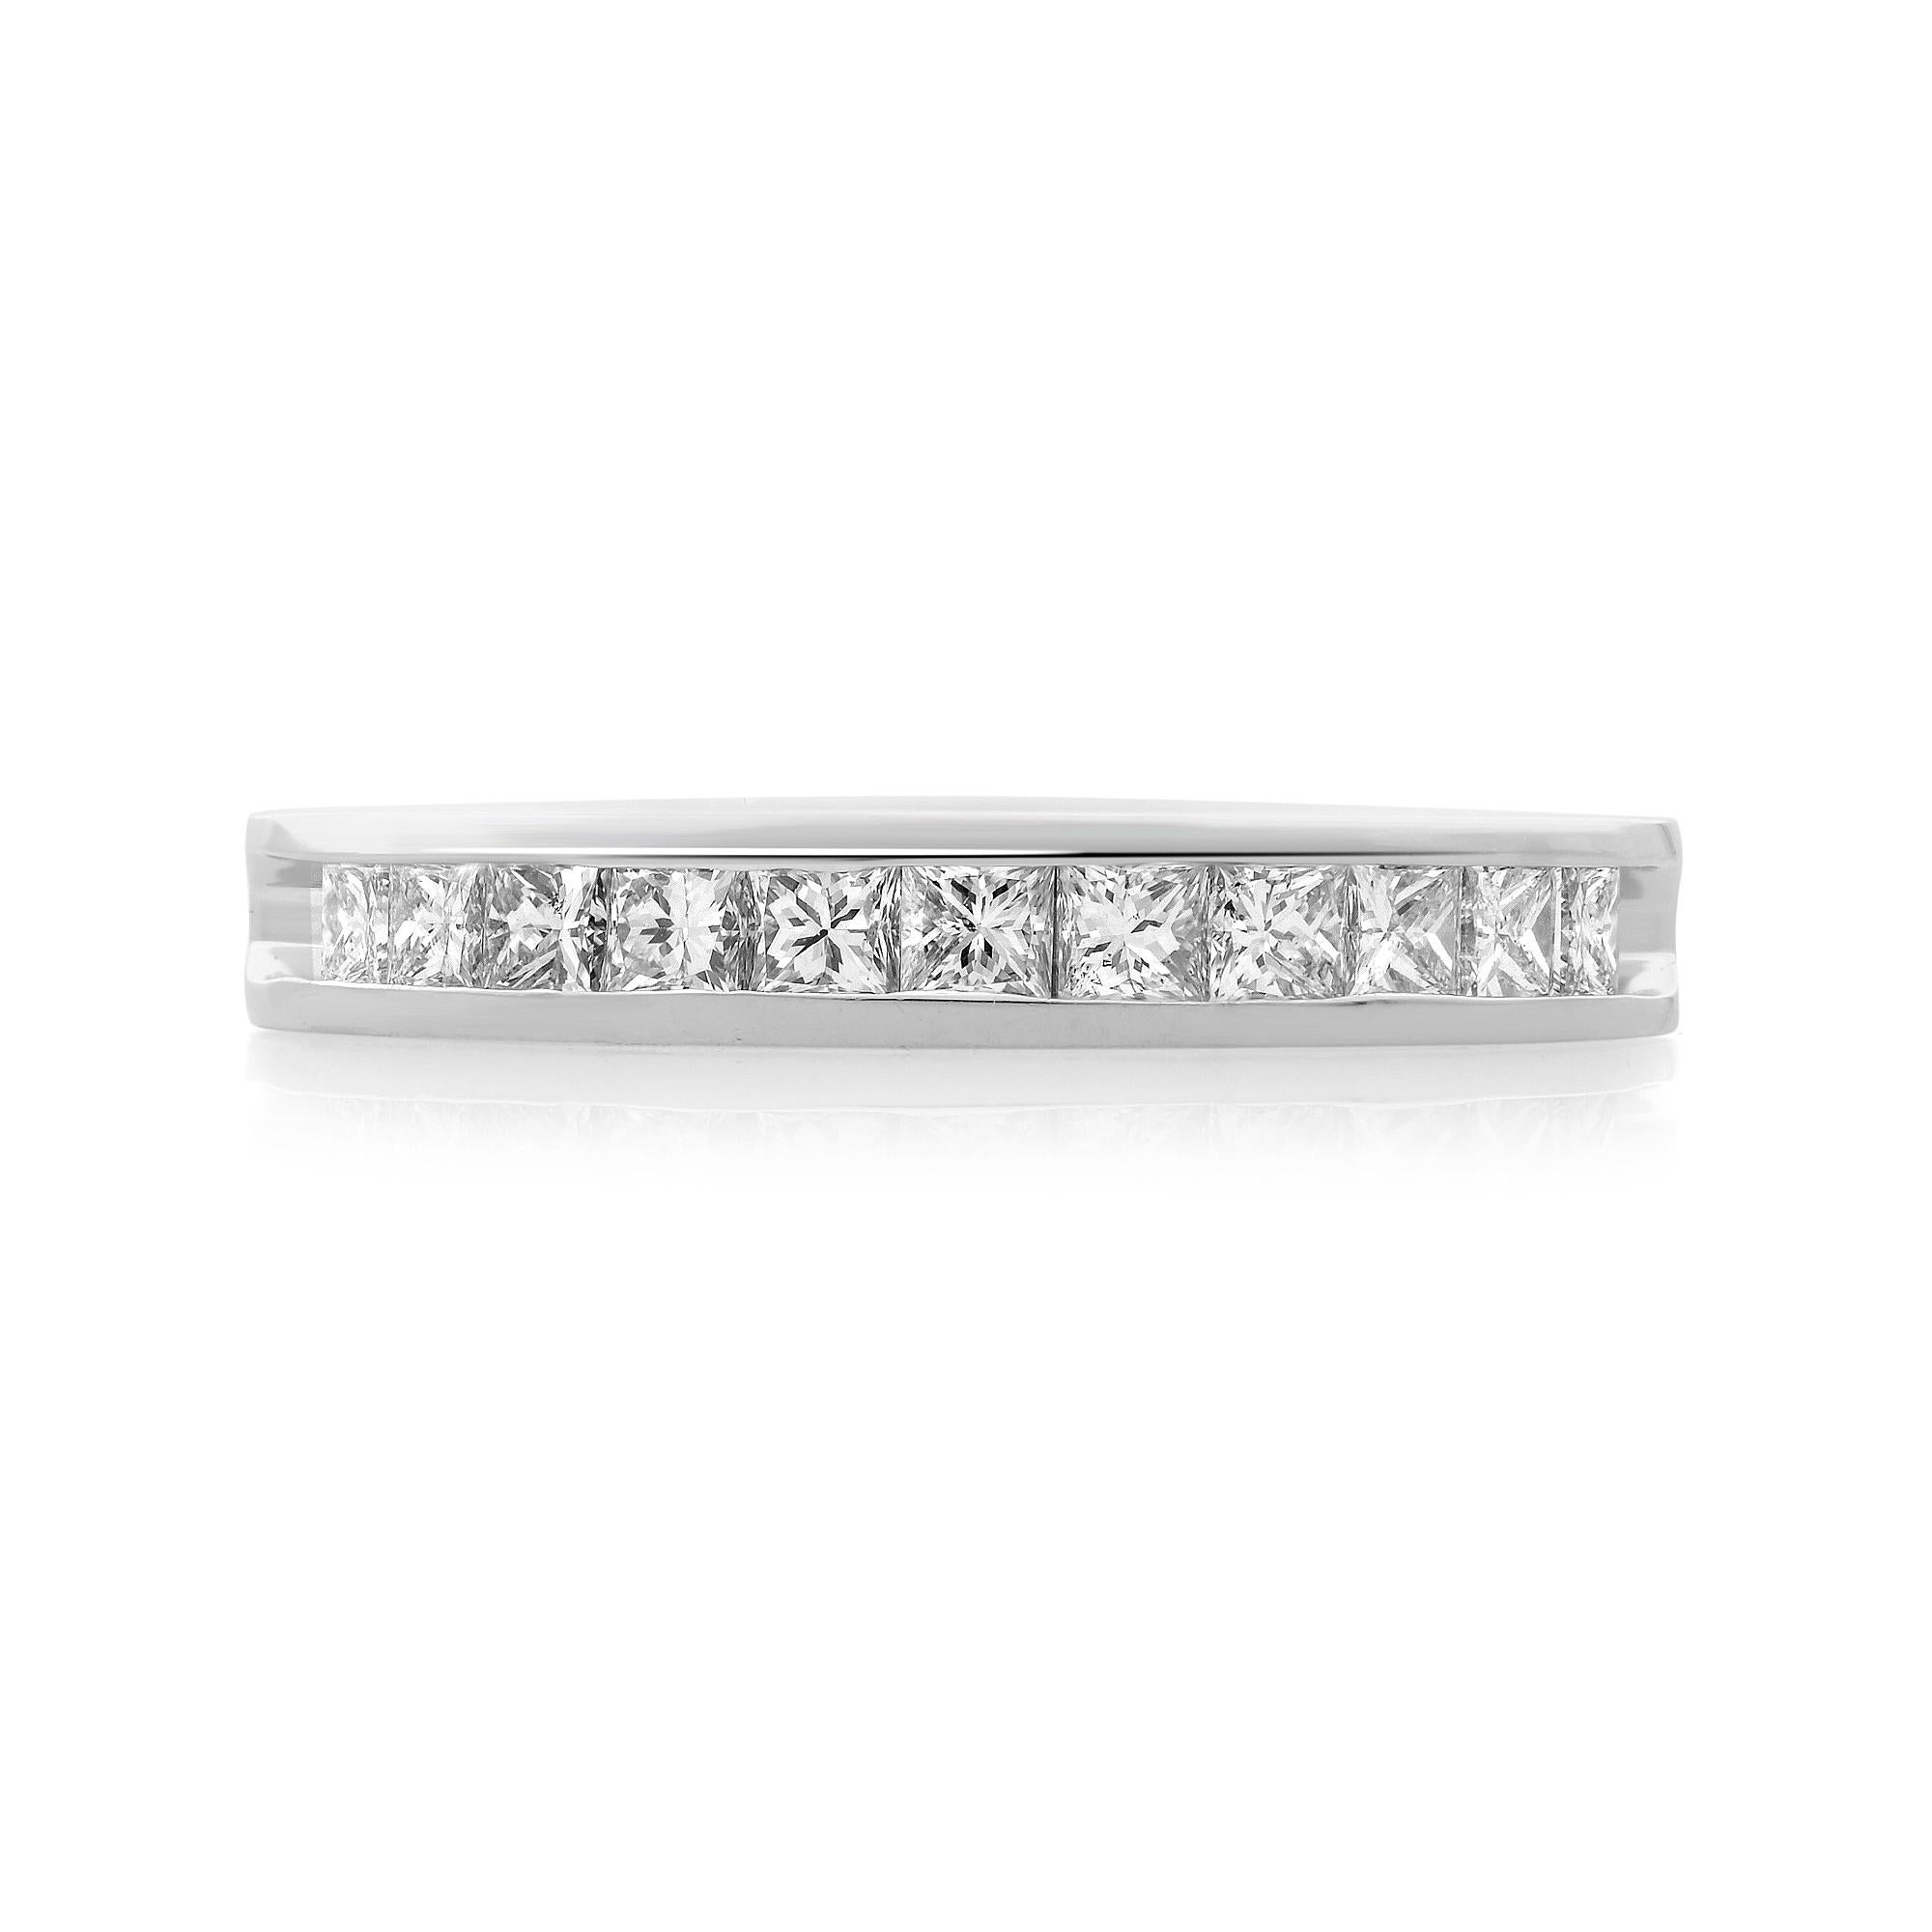 Presenting this elegant and classic wedding band crafted in platinum with 11 princess cut channel set diamonds. The total diamond carat weight is 0.50 with G color and SI1 clarity. Band width is 3.10mm. Ring size 7. Comes in a presentable gift box.
